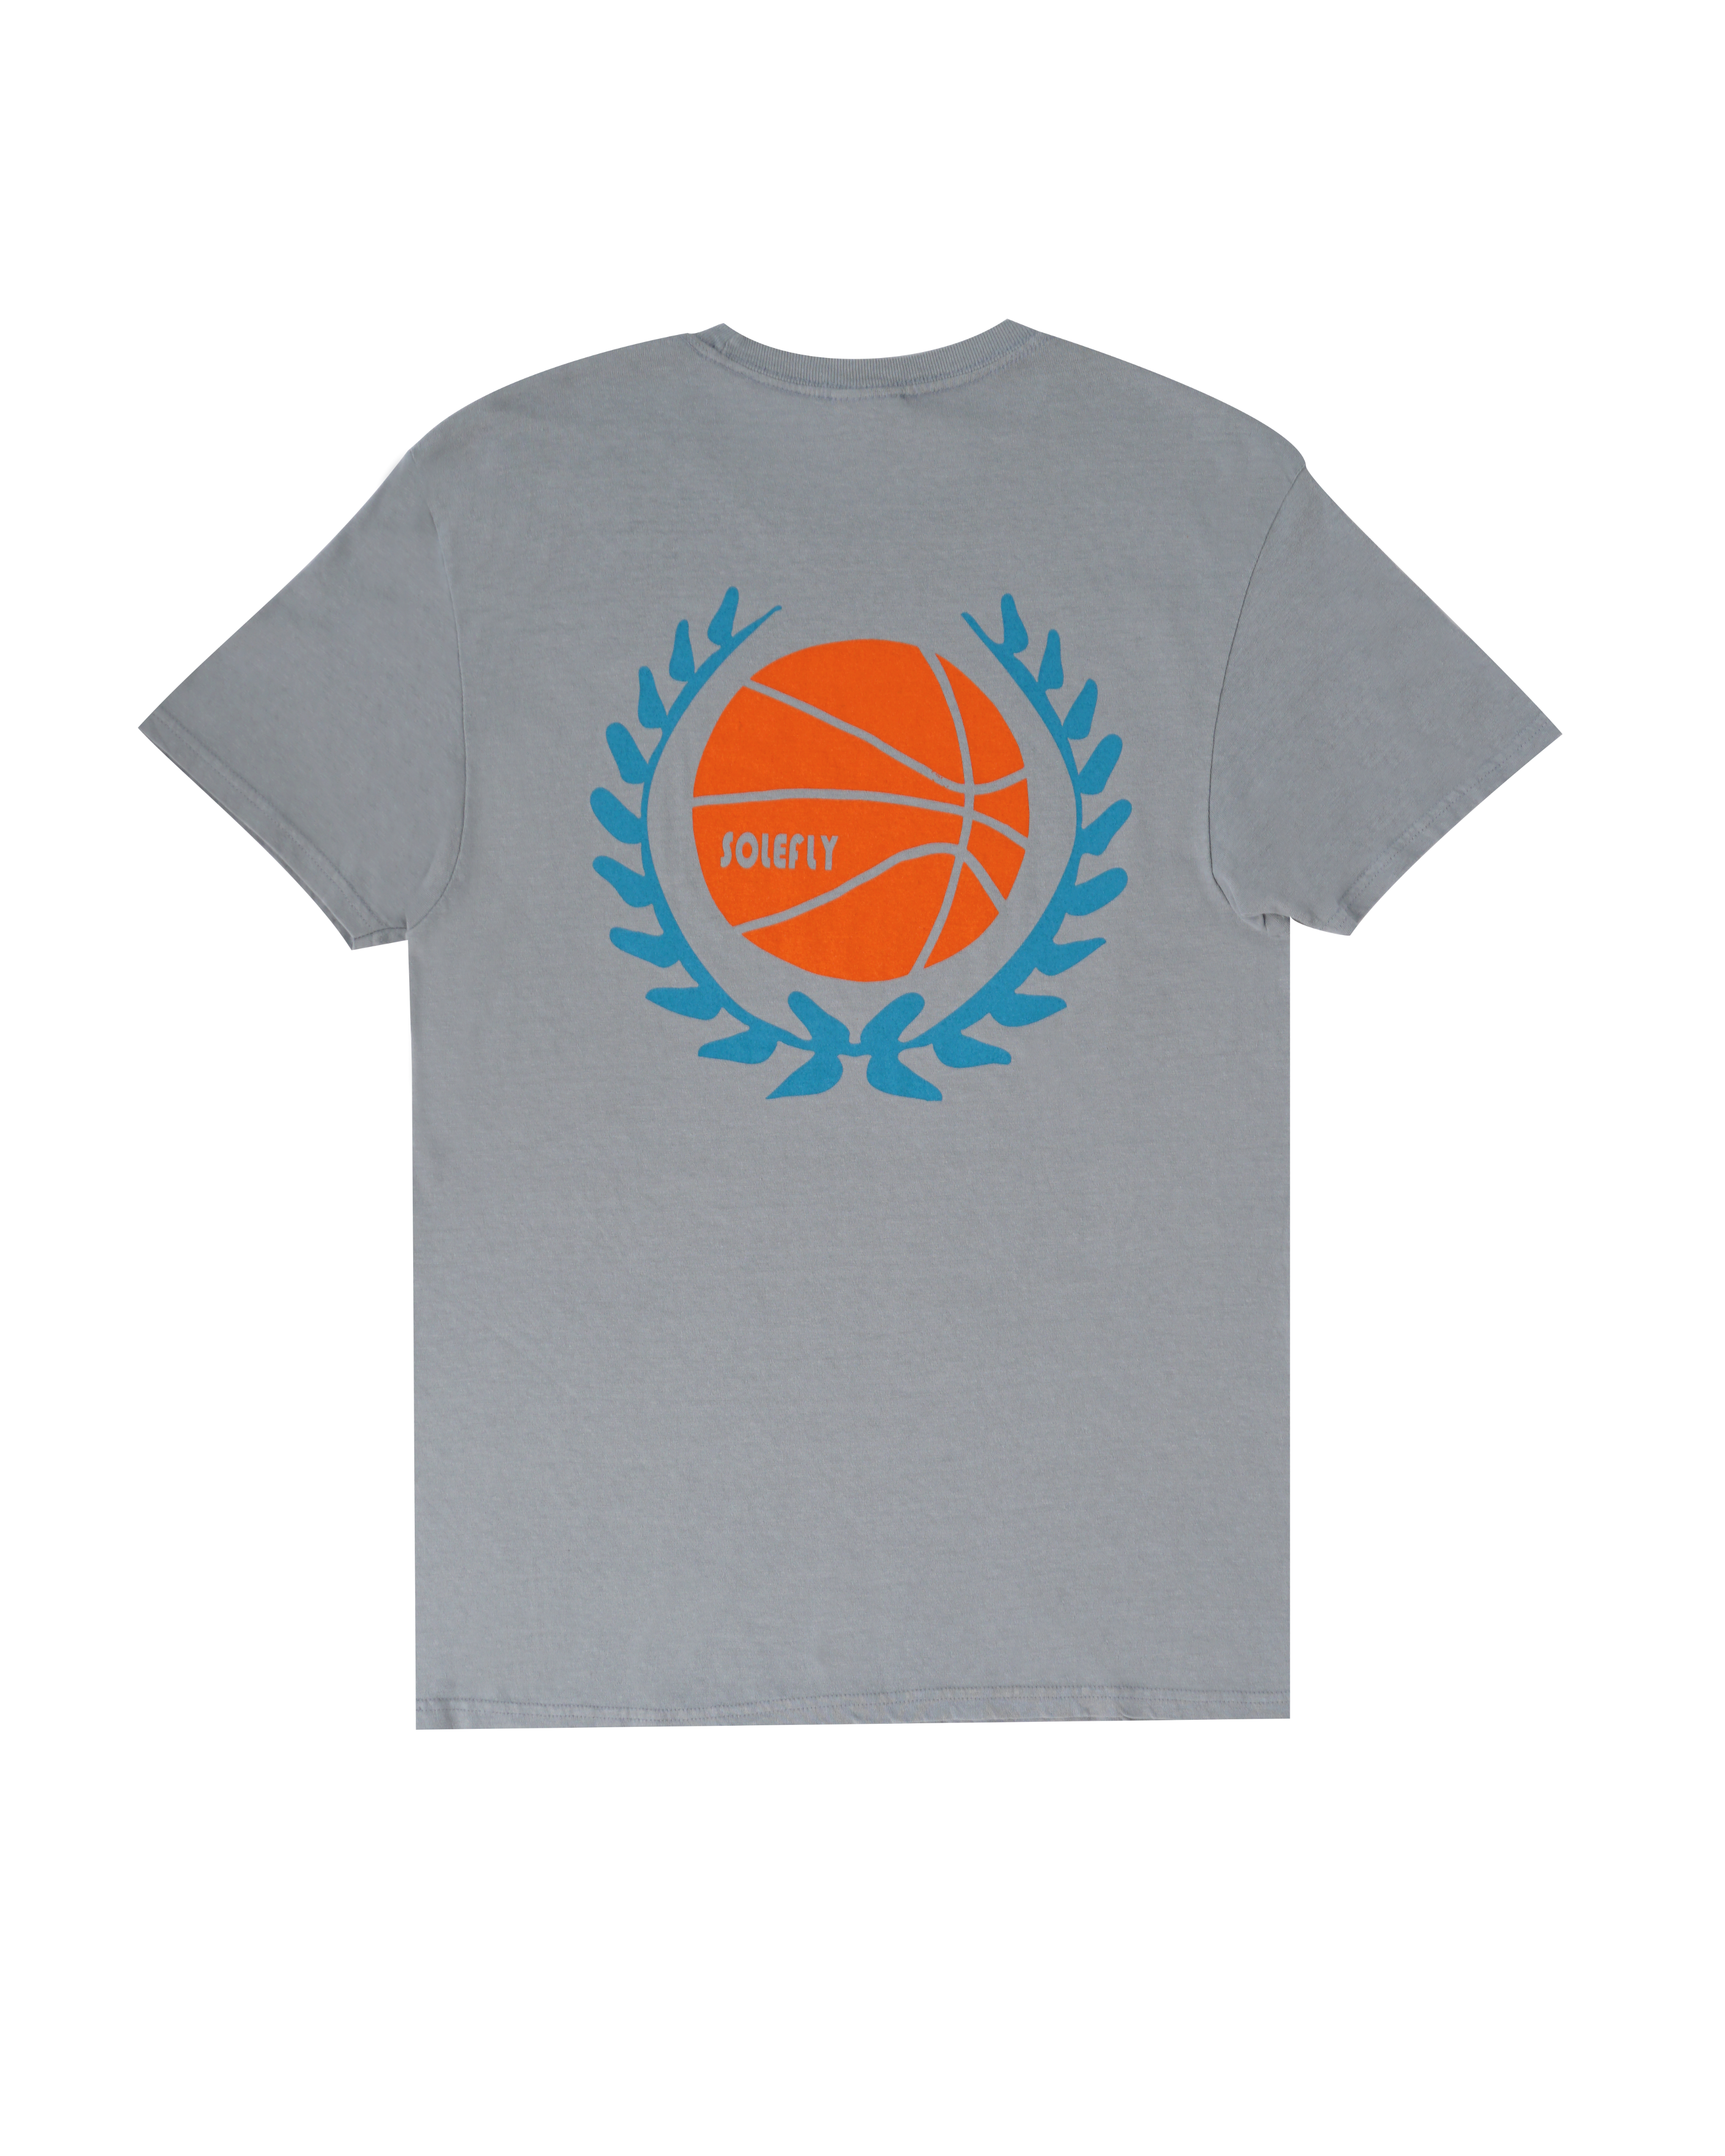 Sole Fly Basketball Crest Tee